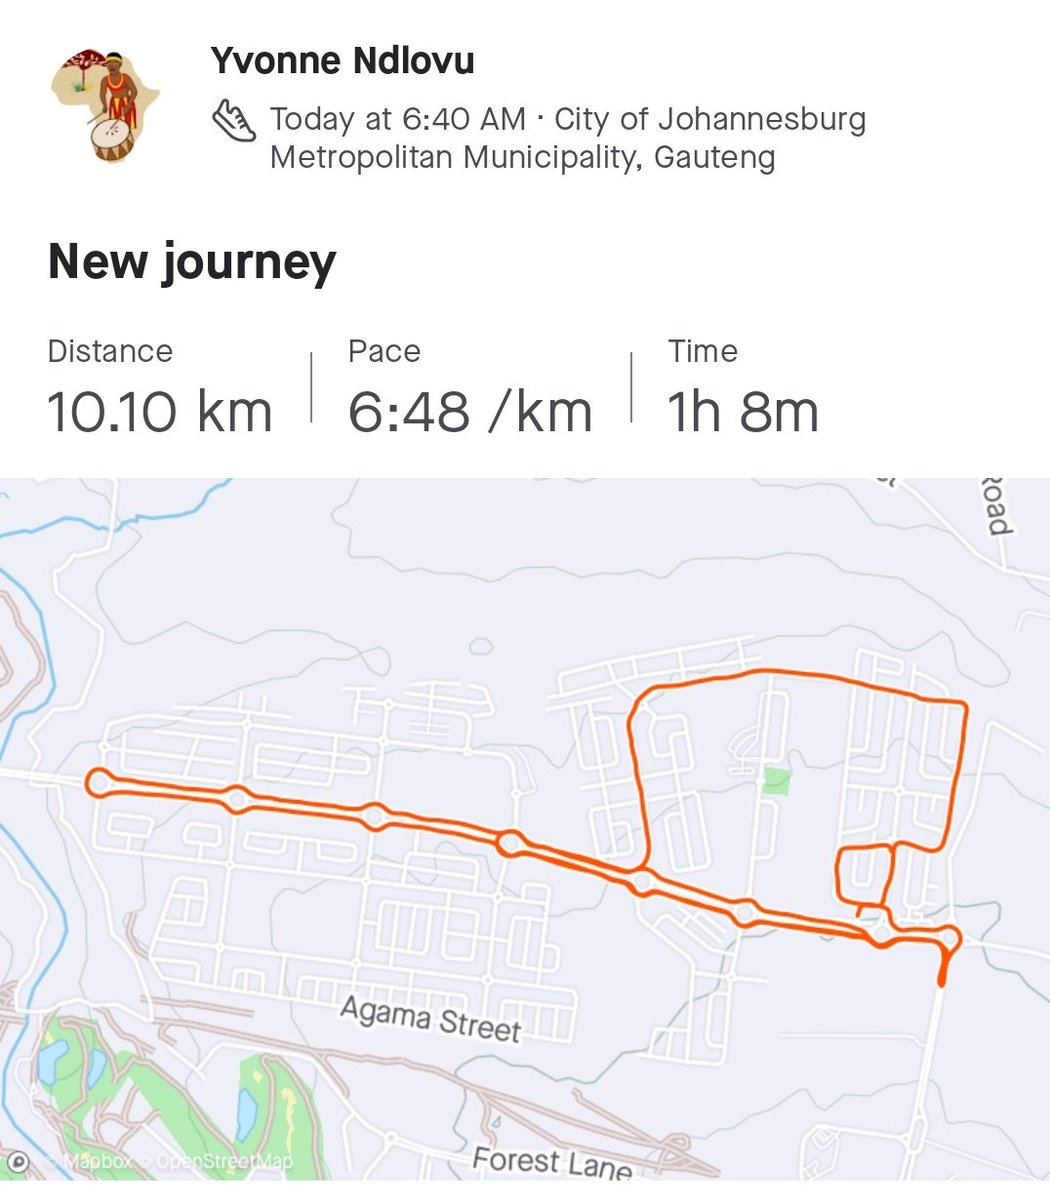 We did well today
#FetchYourBody2022 
#RunningWithTumiSole 
#Choose2beActive
#IPaintedMyRun